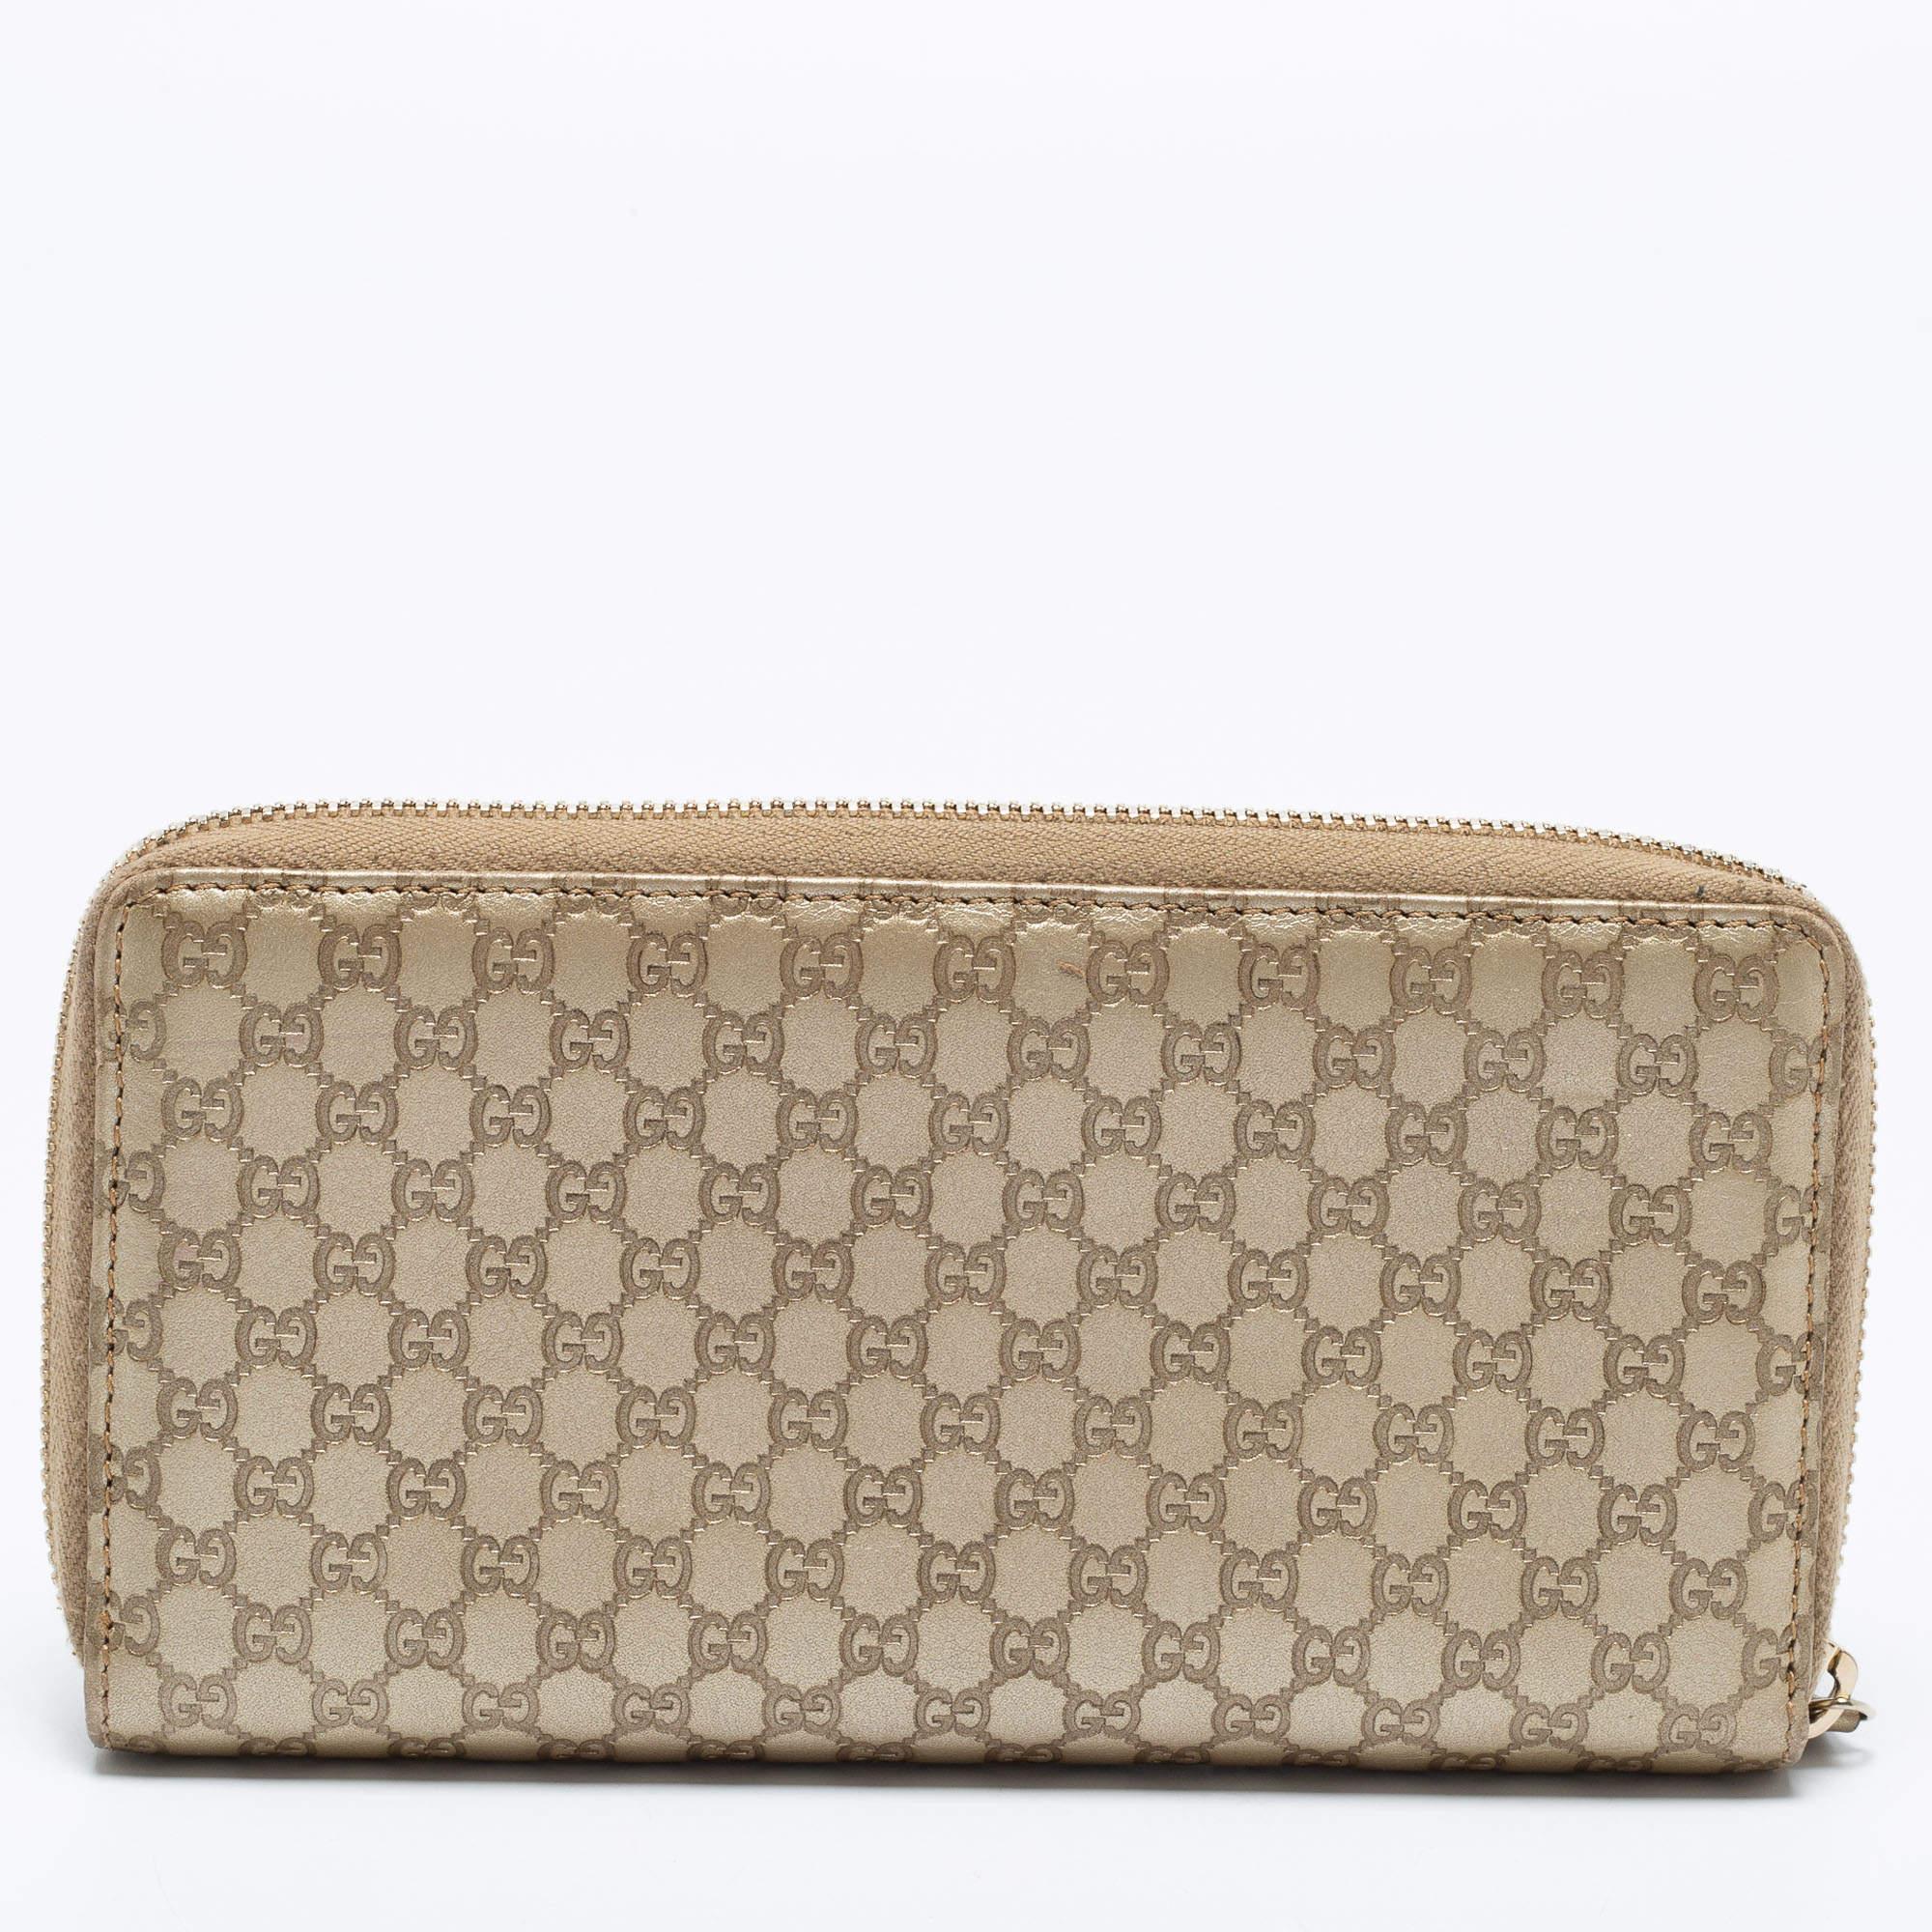 Store your monetary essentials hassle-free in this wallet from Gucci. Durable and sophisticated, it is crafted from microguccissima leather in a metallic beige shade. The zip-around closure secures multiple compartments, and the front is adorned